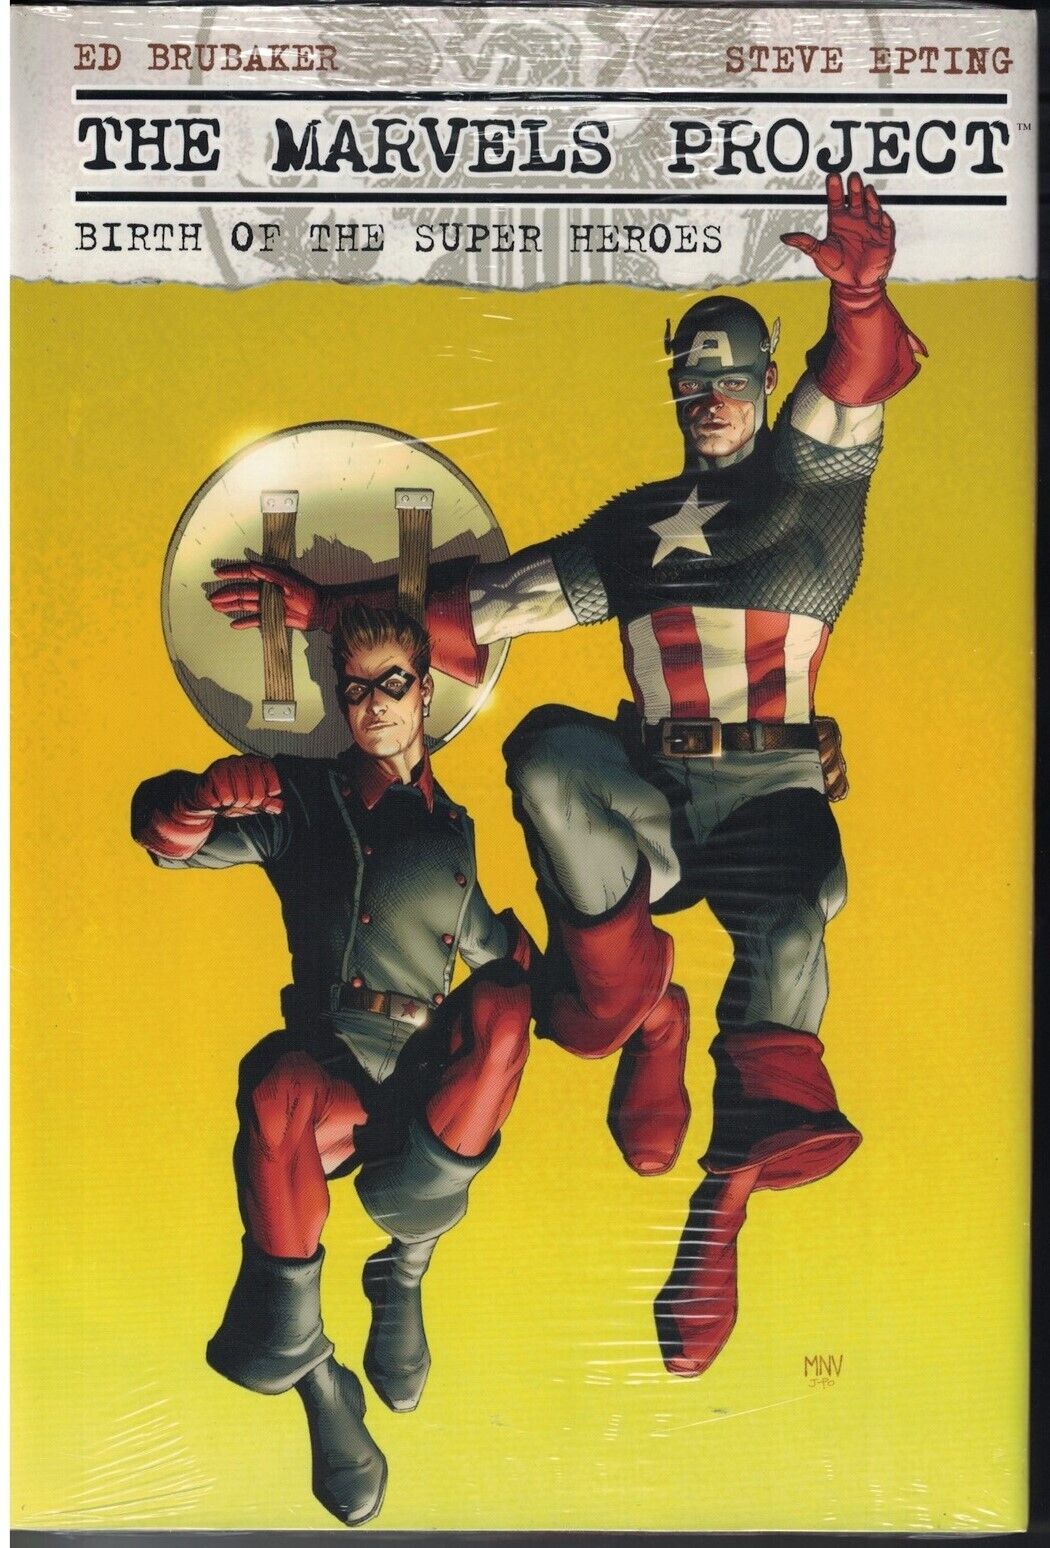 MARVELS PROJECT Birth of the Super-Heroes HC Hardcover Ed Brubaker SEALED NEW NM